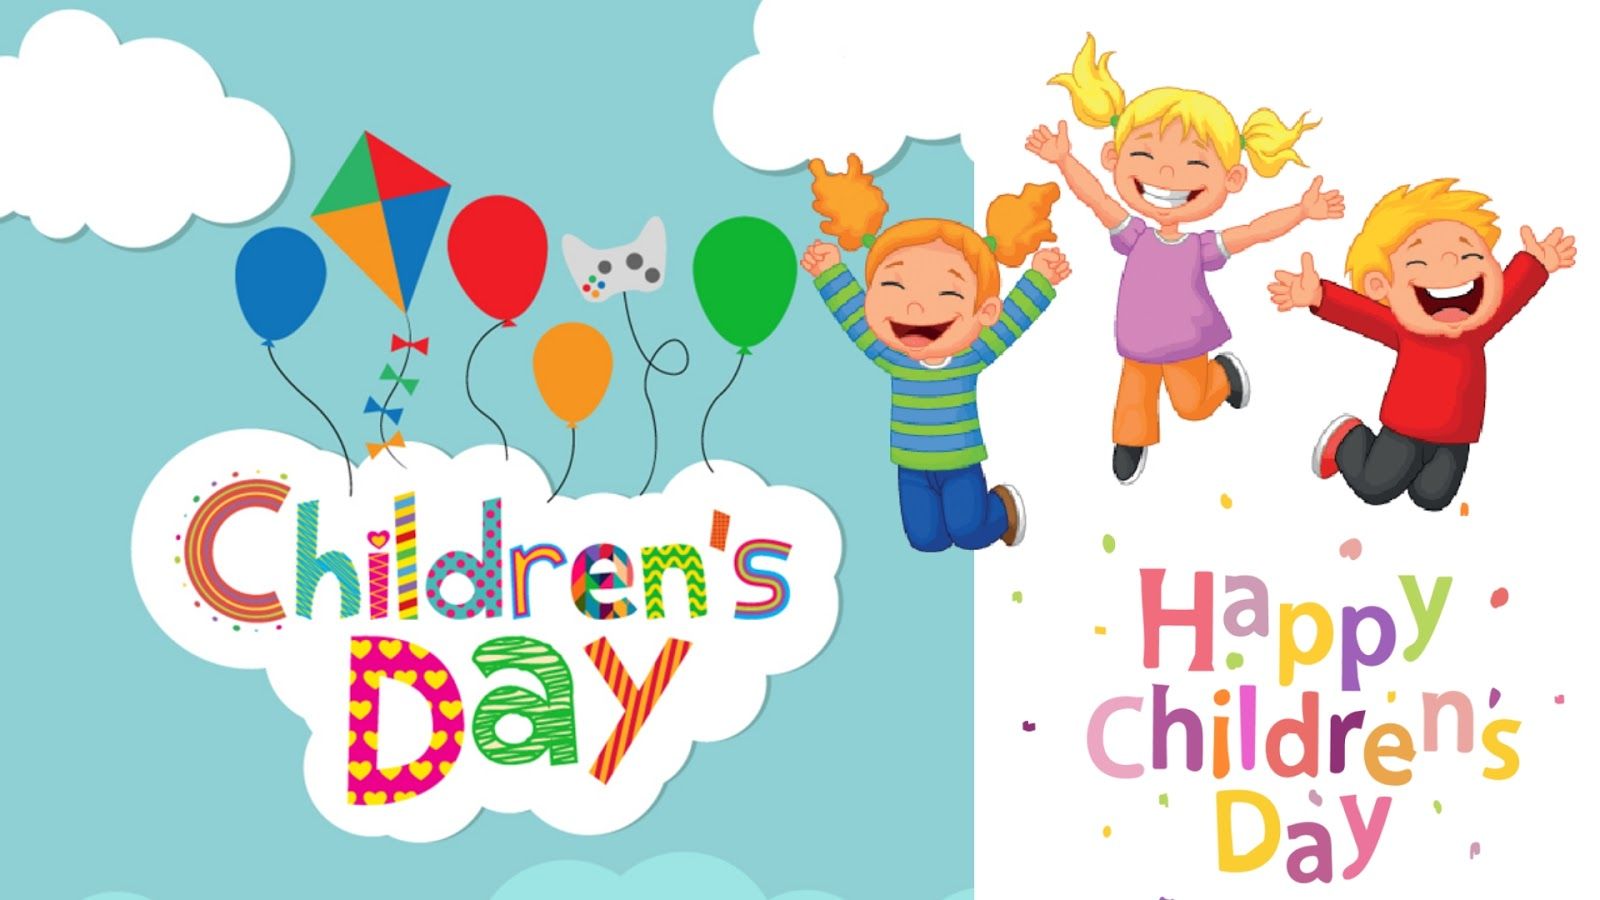 Children's Day Greetings, Happy Children's Day Quotes